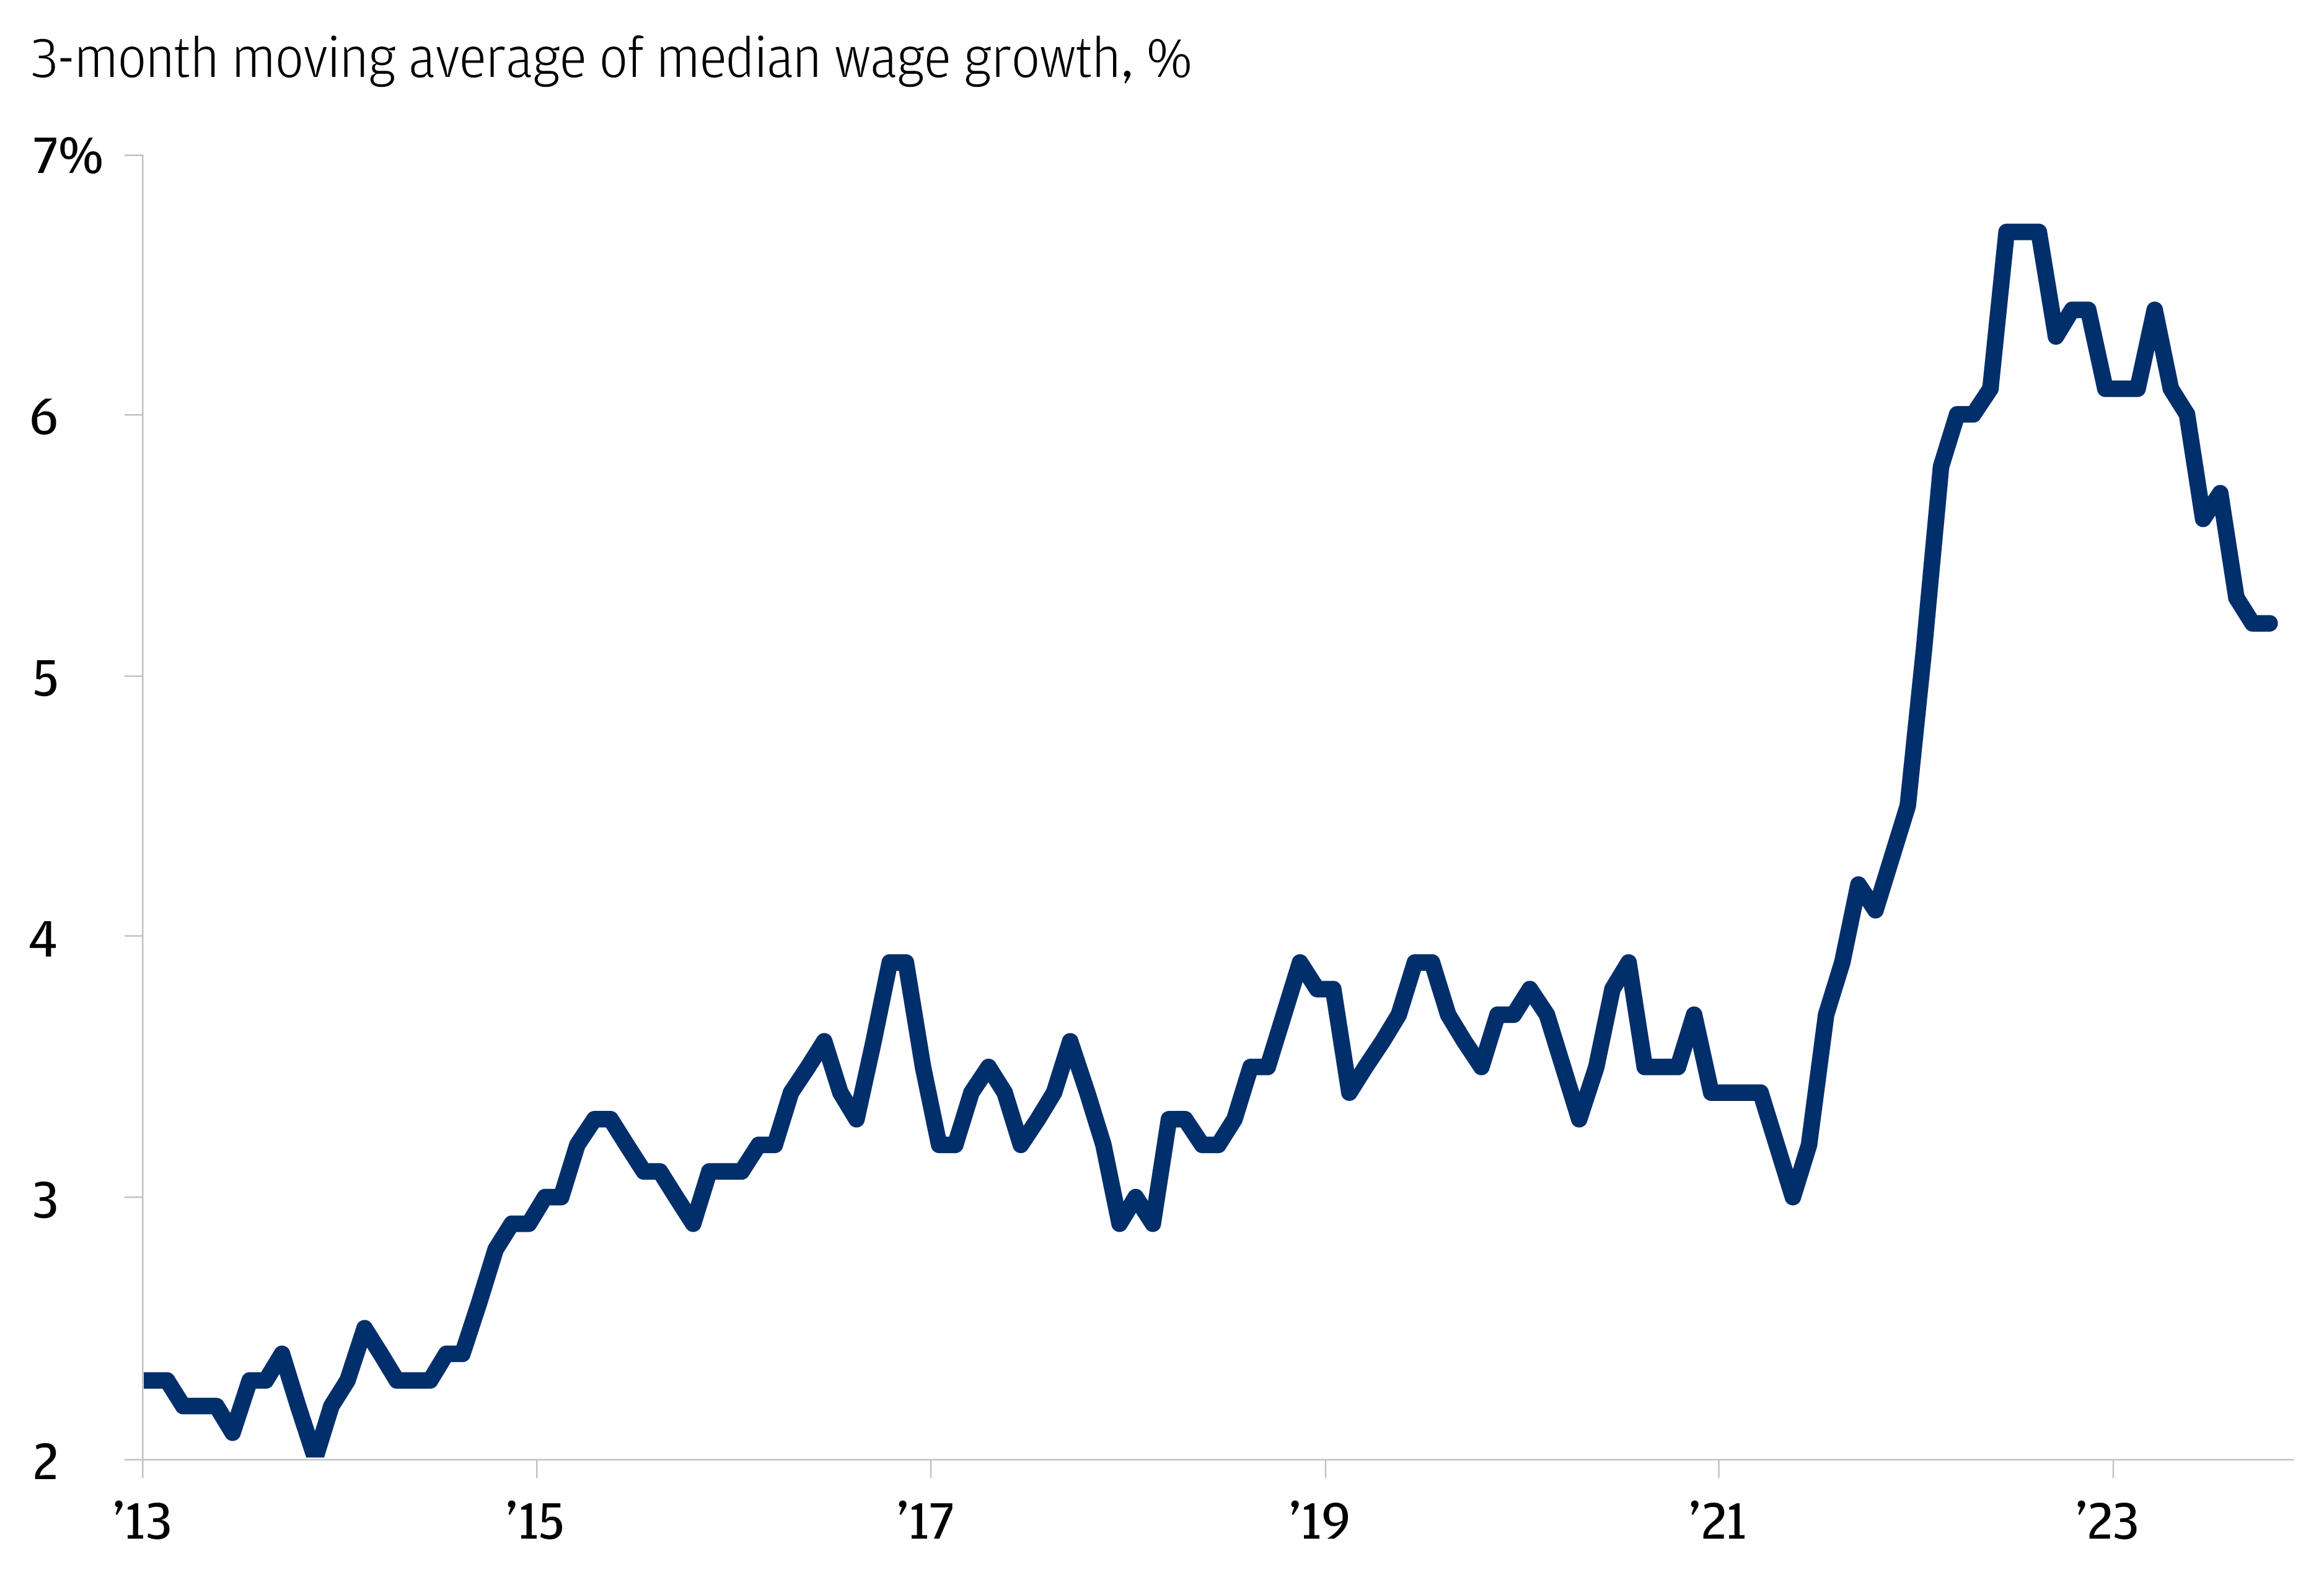 This chart shows the 3-month moving average of median wage growth, from 2013 to 2023 in the United States. 